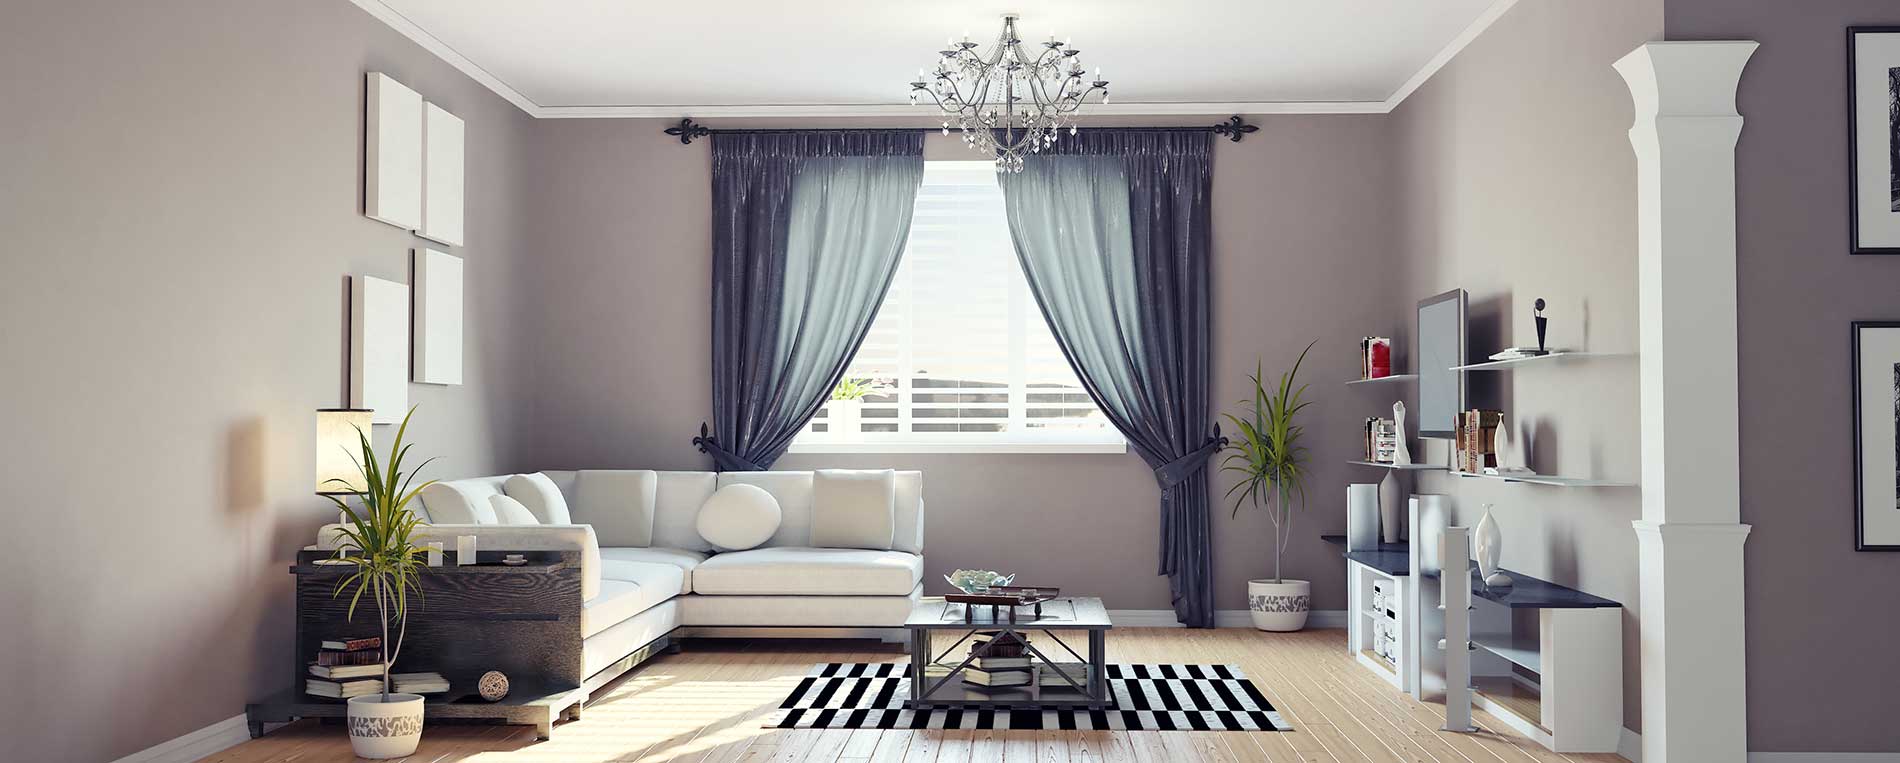 Blackout Curtains For Bedroom Windows, San Francisco